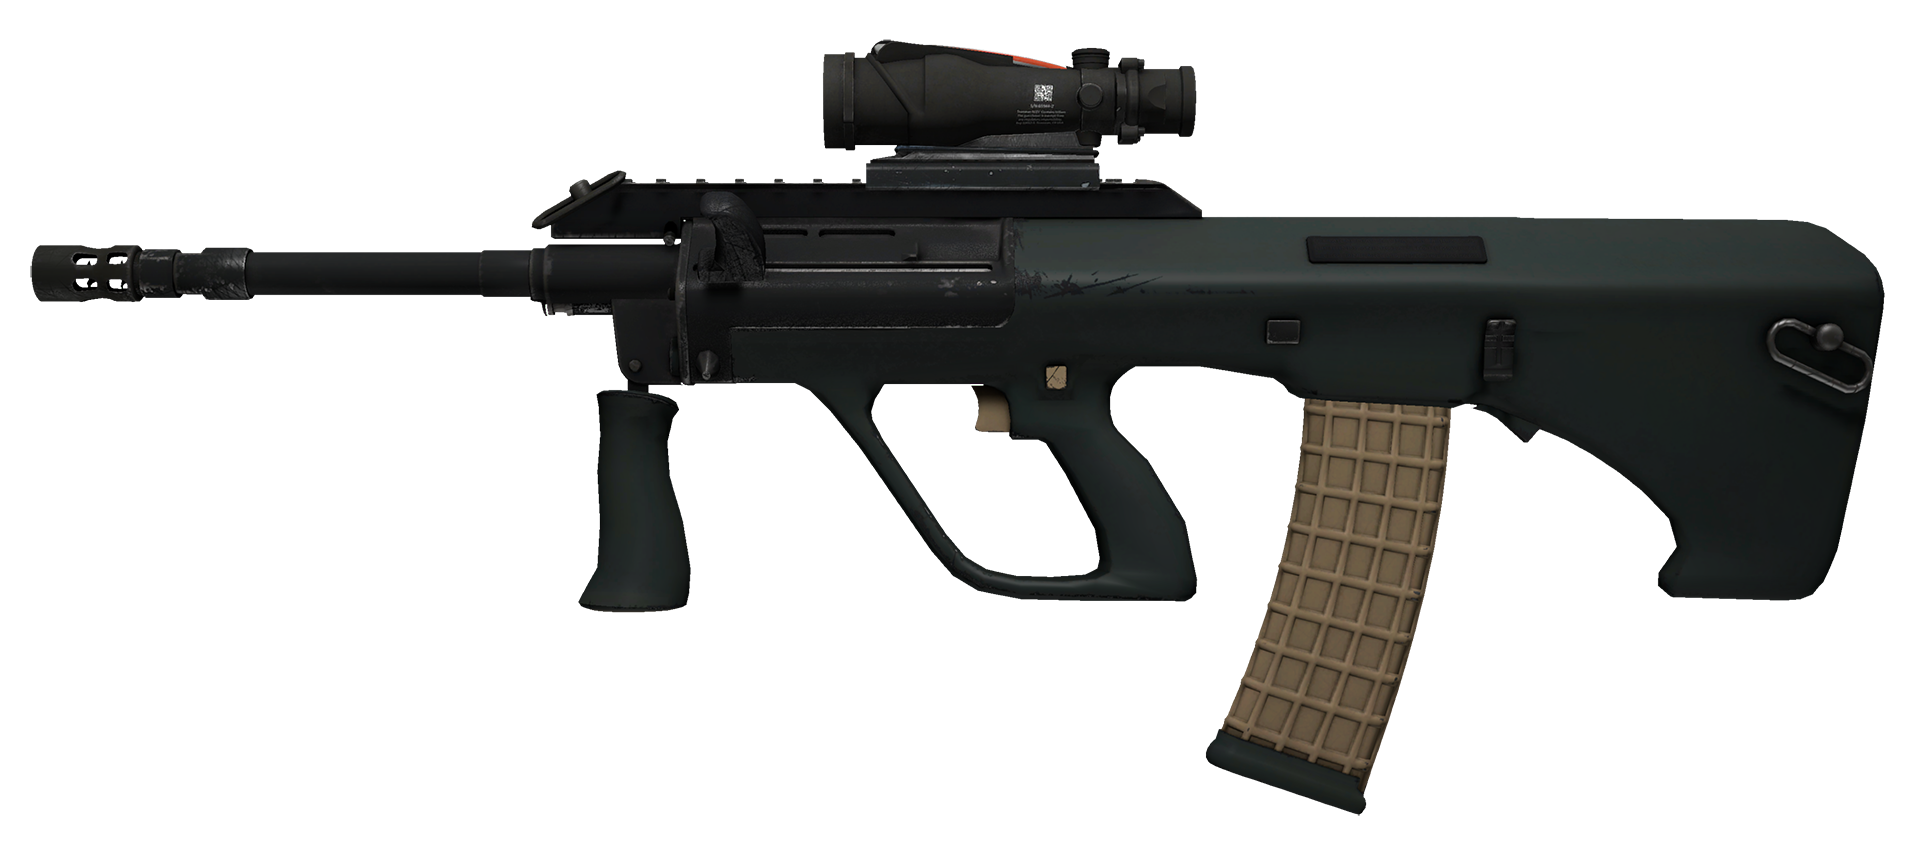 download the new for android SCAR-20 Contractor cs go skin